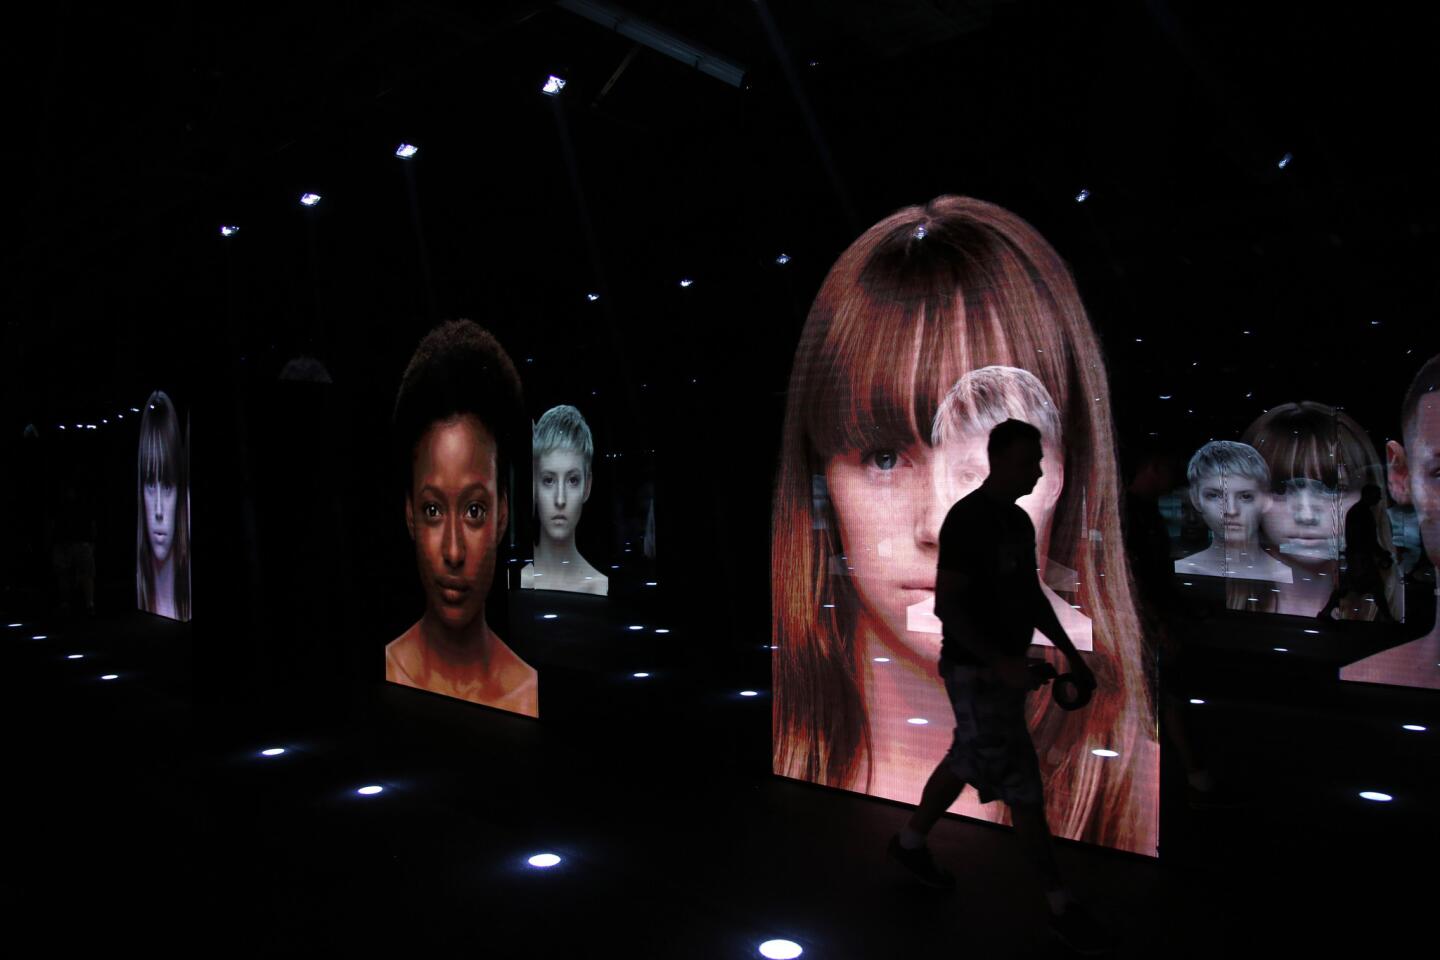 Images are projected onto mirrors lining a hallway at the exhibition. The interactive, multimedia experience lets visitors go behind the scenes of creating a runway collection and staging a fashion show. Admission is free.